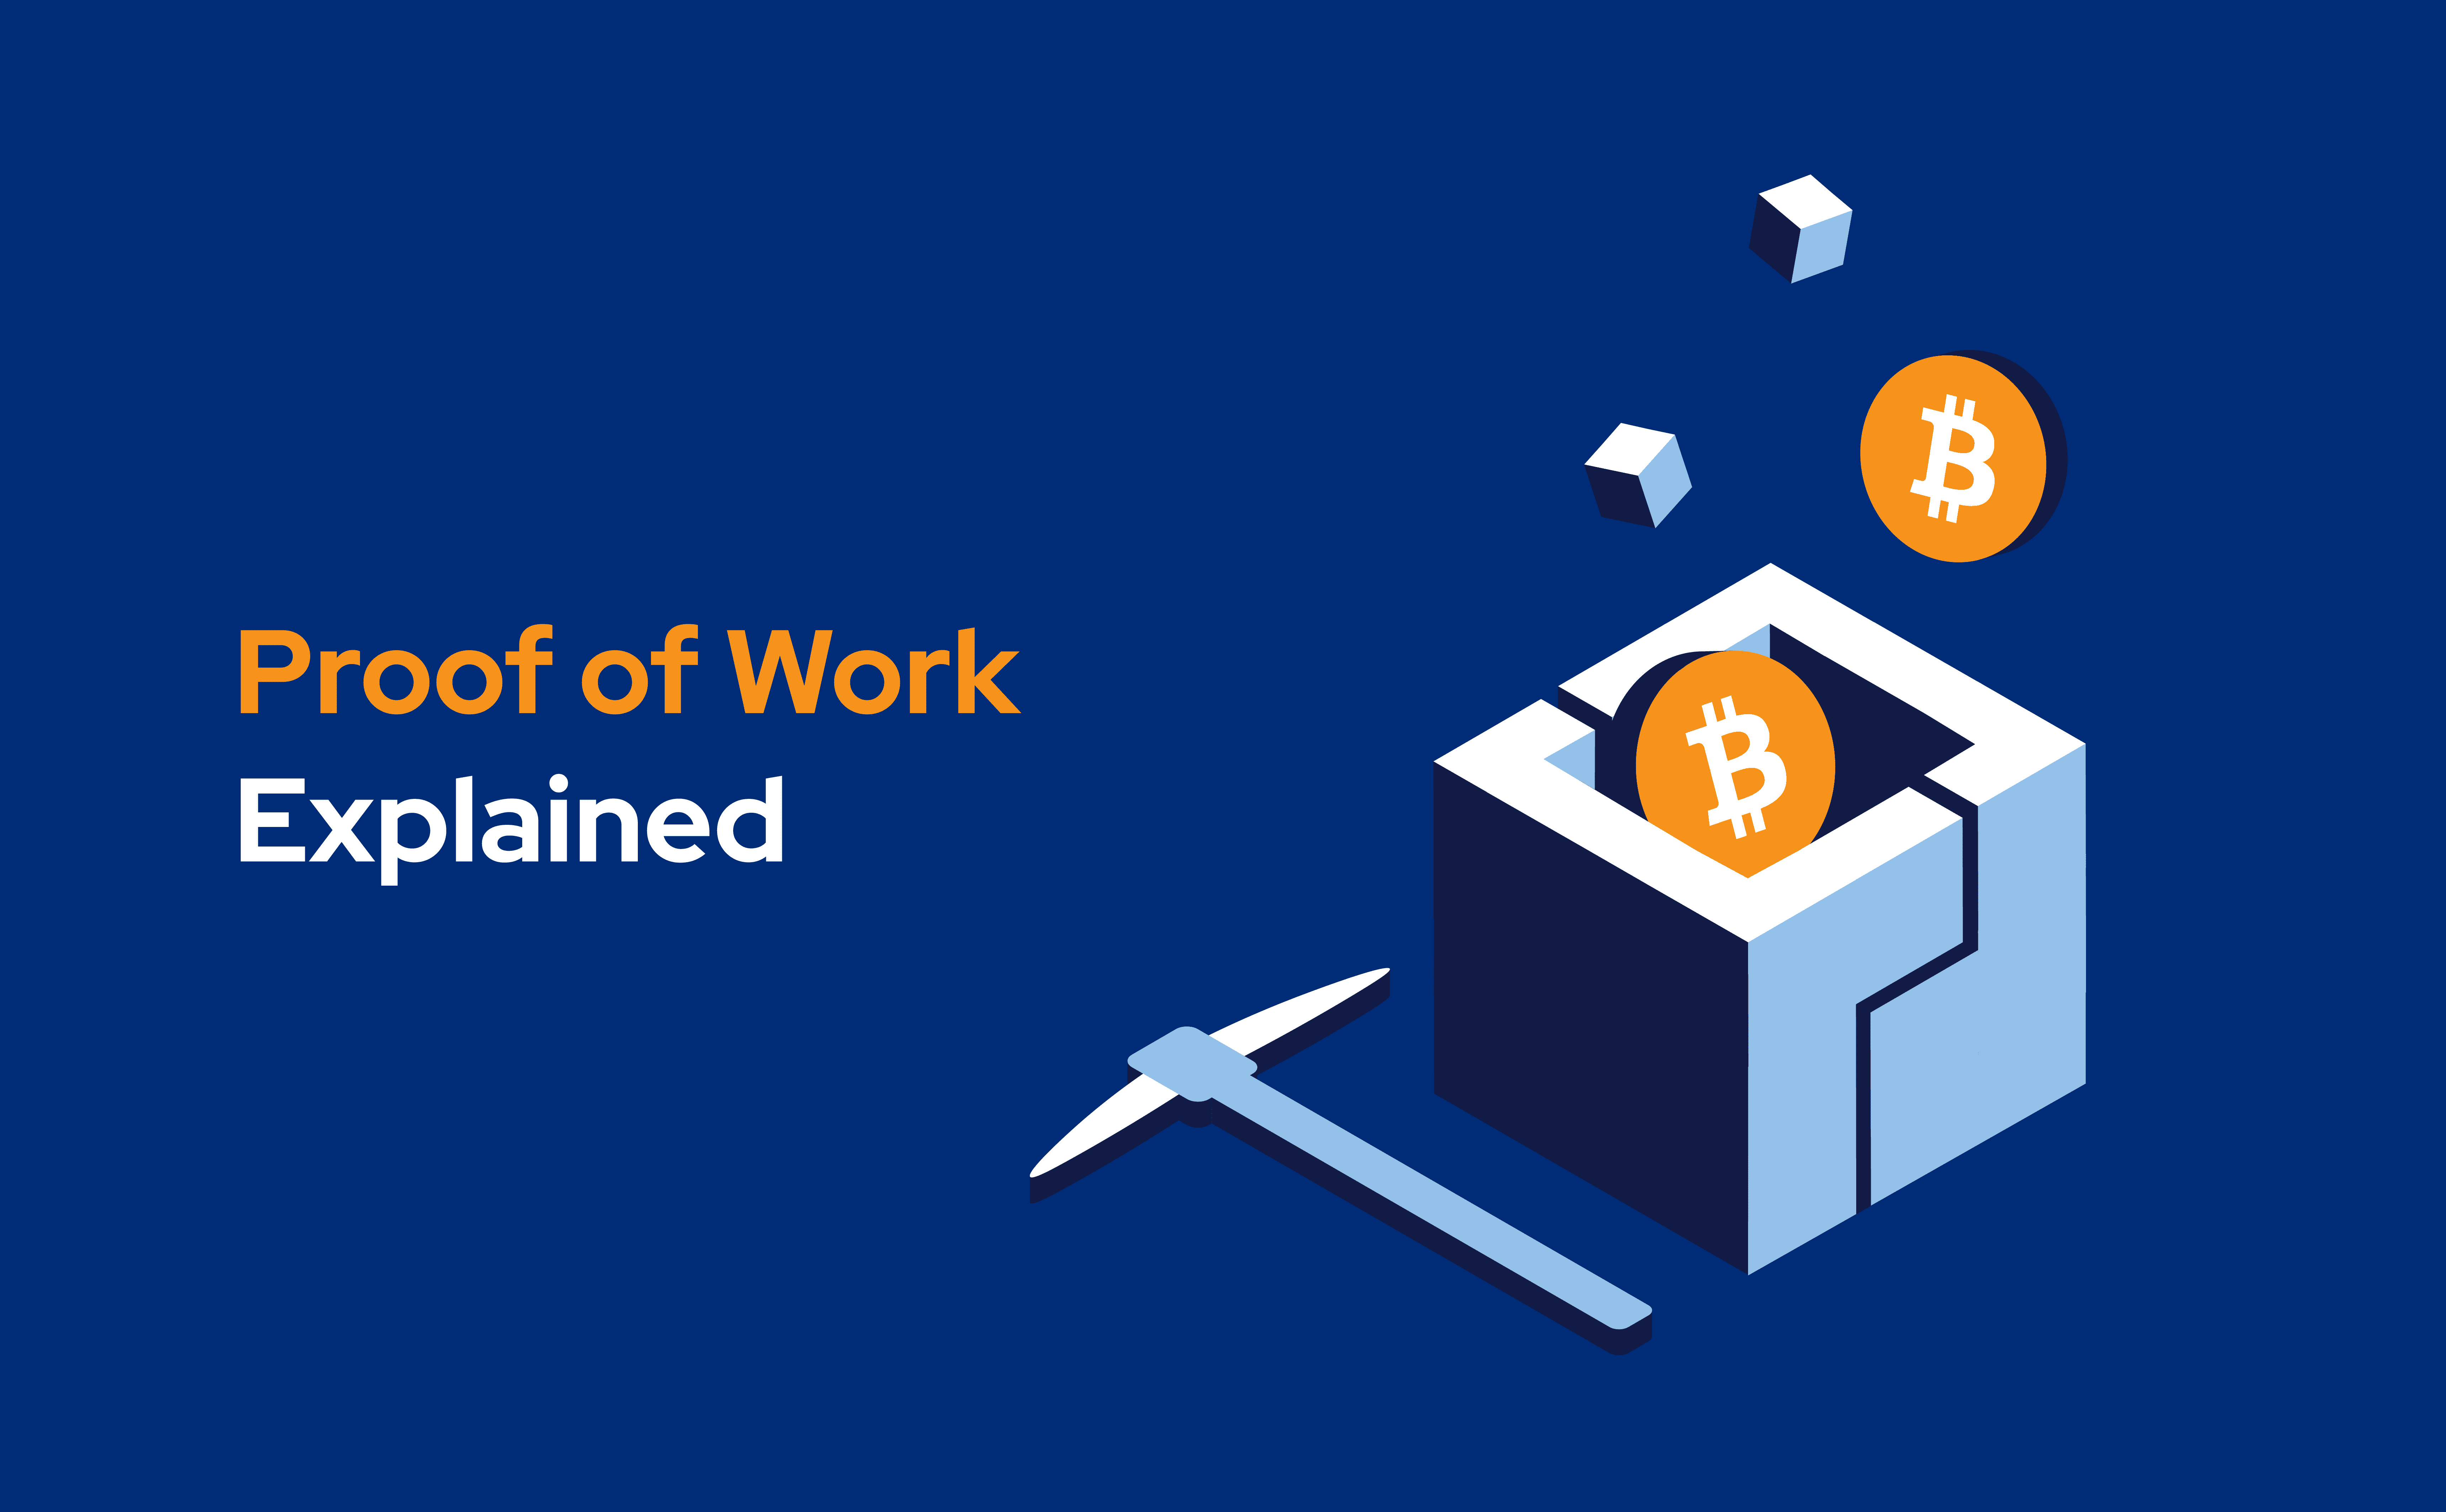 Proof of work explained